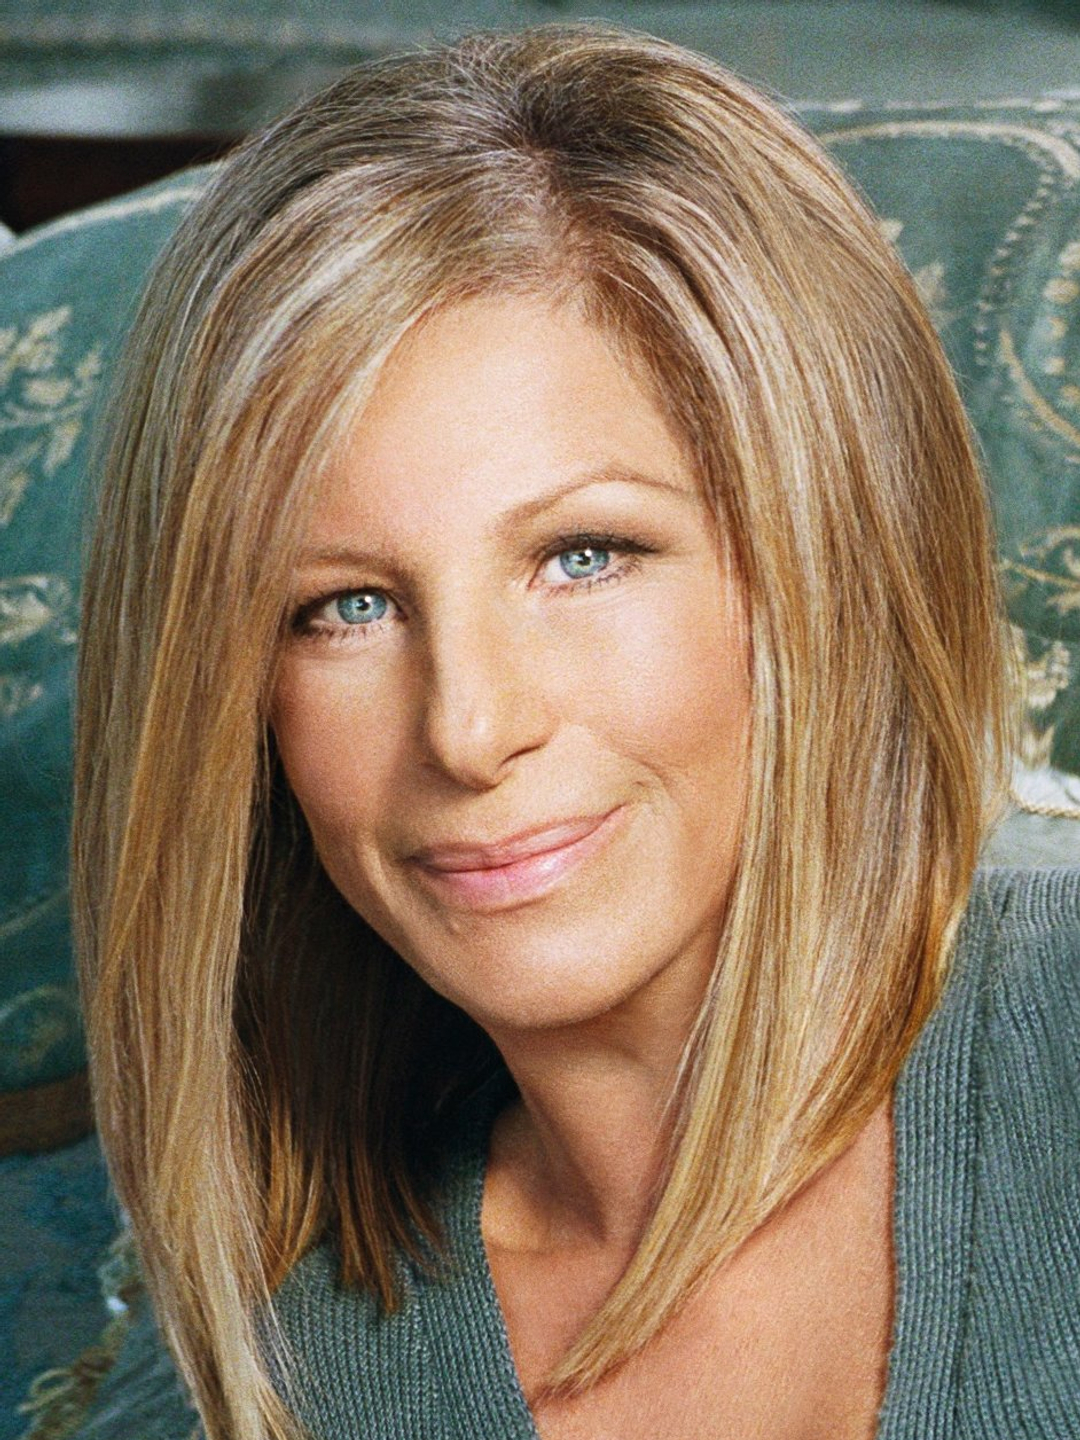 Barbra Streisand who is her father